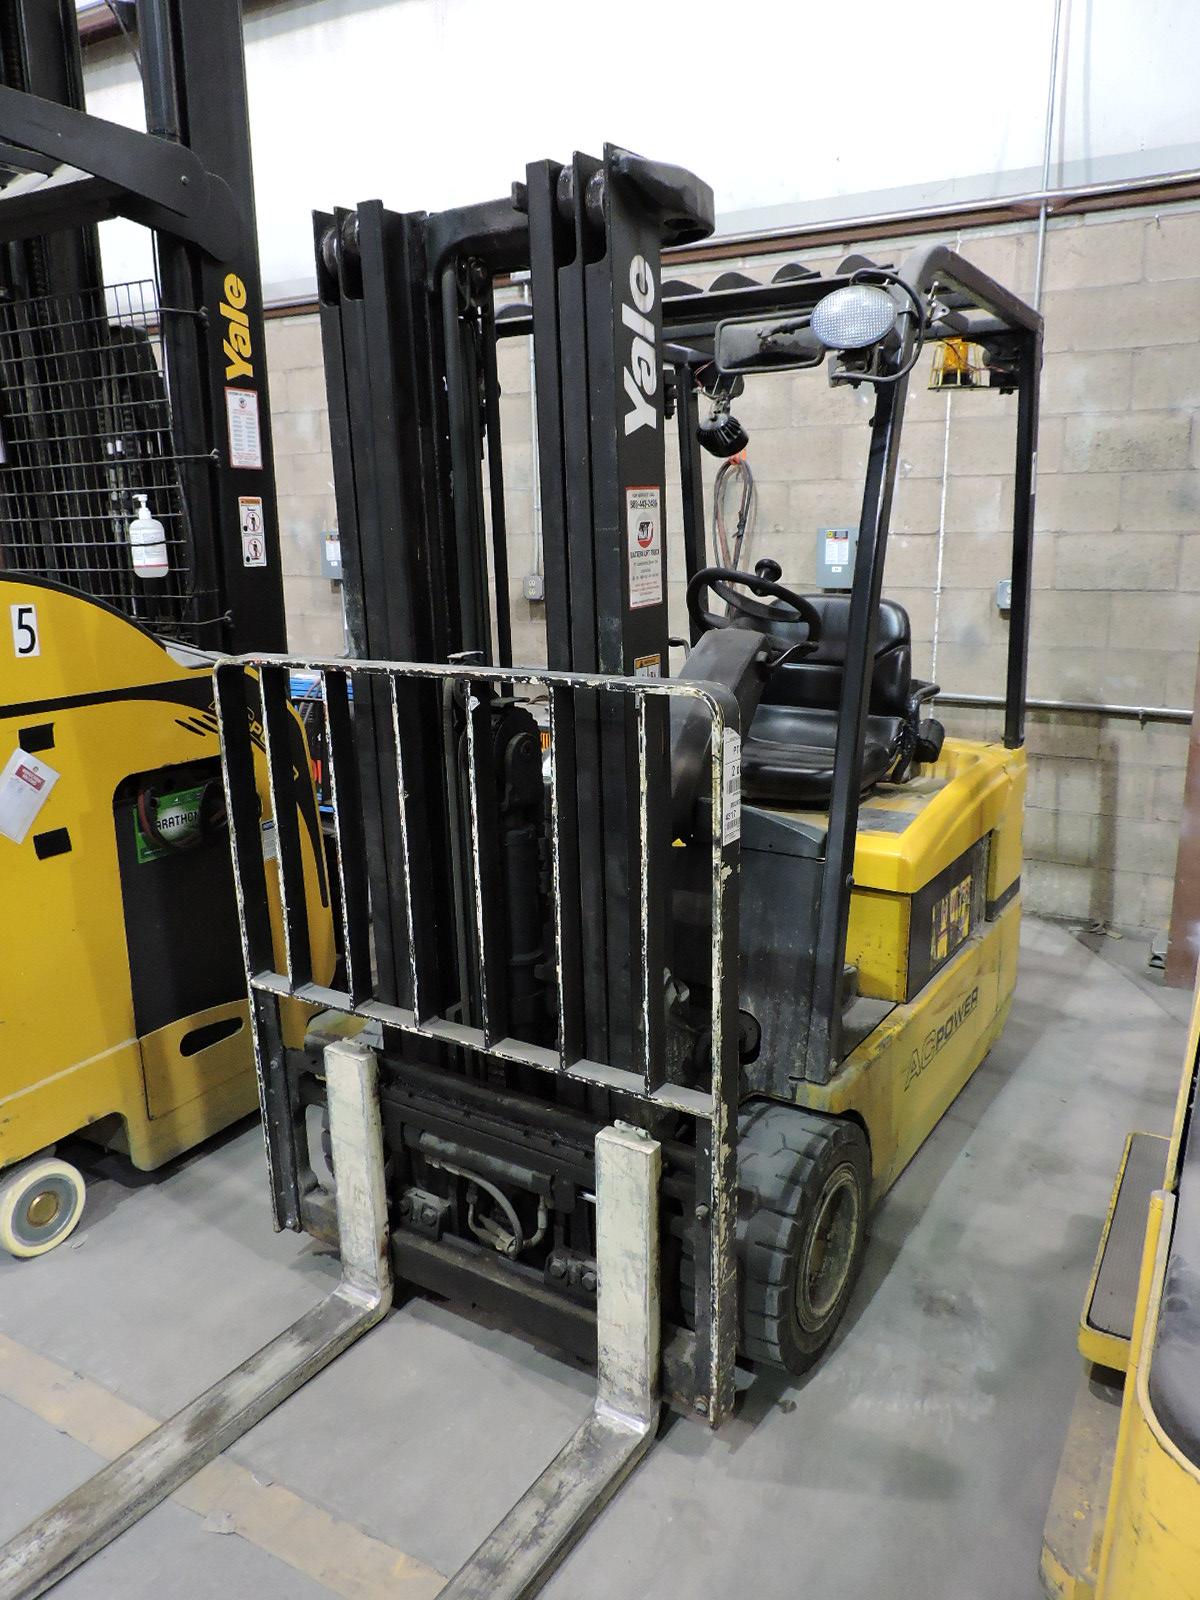 YALE Electric Forklift / Fork Truck - with Charger / Fully Functional / 3600 LB Capacity